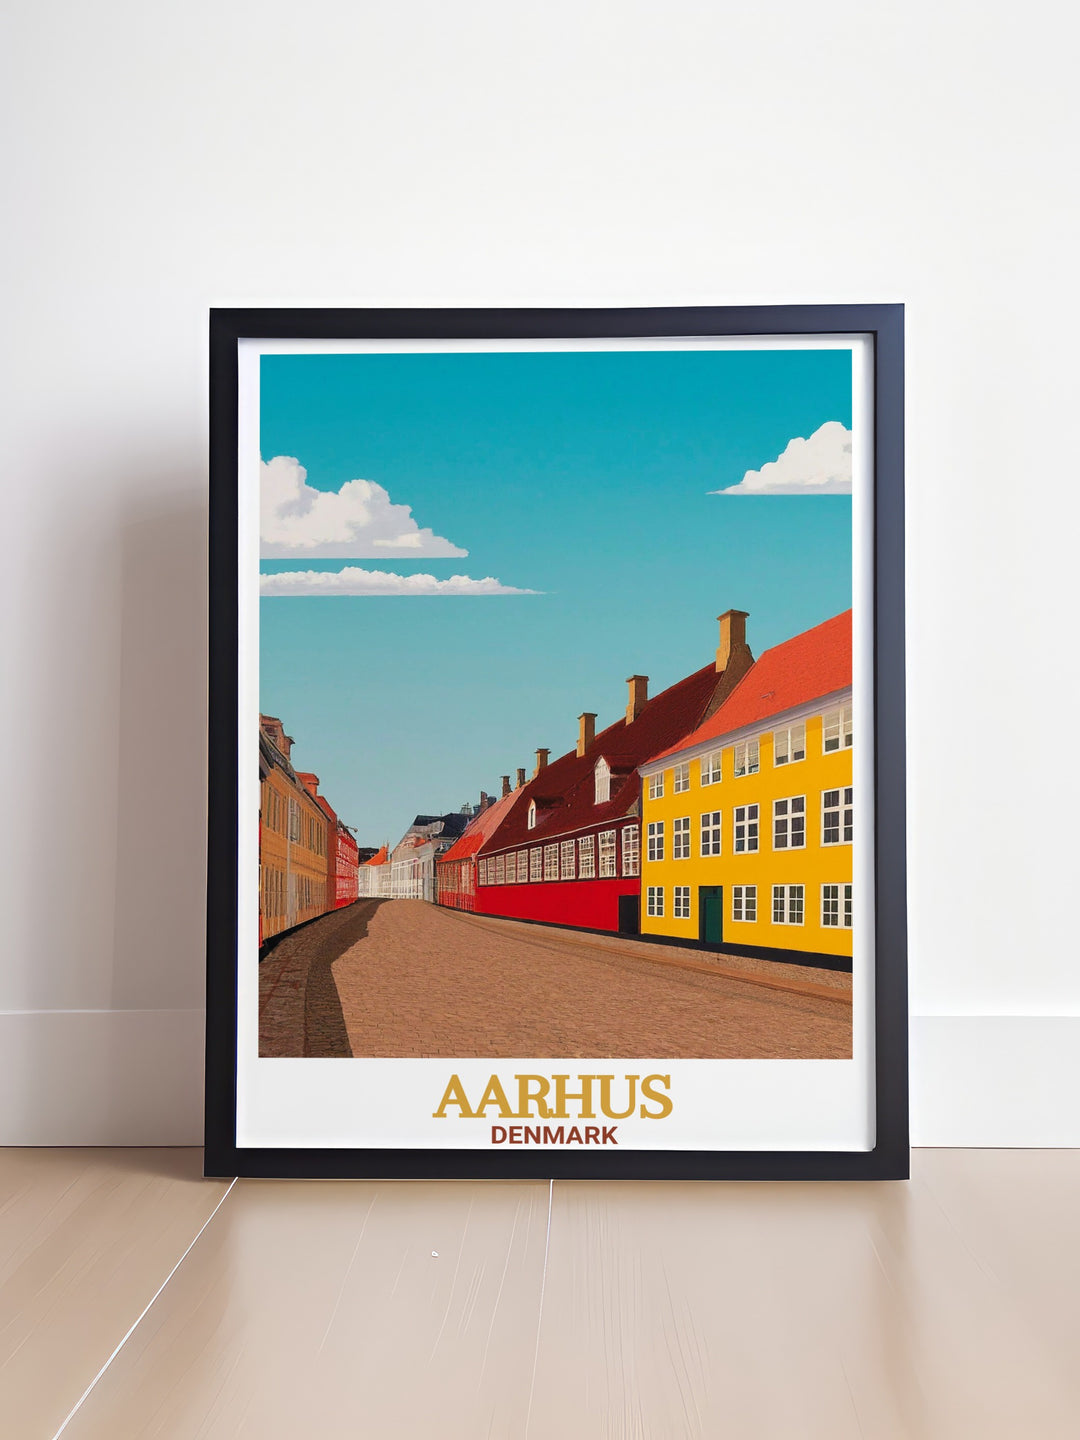 Discover the beauty of Den Gamle By with this captivating Aarhus print. Perfect for Aarhus wall art enthusiasts and Denmark decor collectors. This vintage print highlights the historic streets and buildings of Den Gamle By museum in Aarhus.